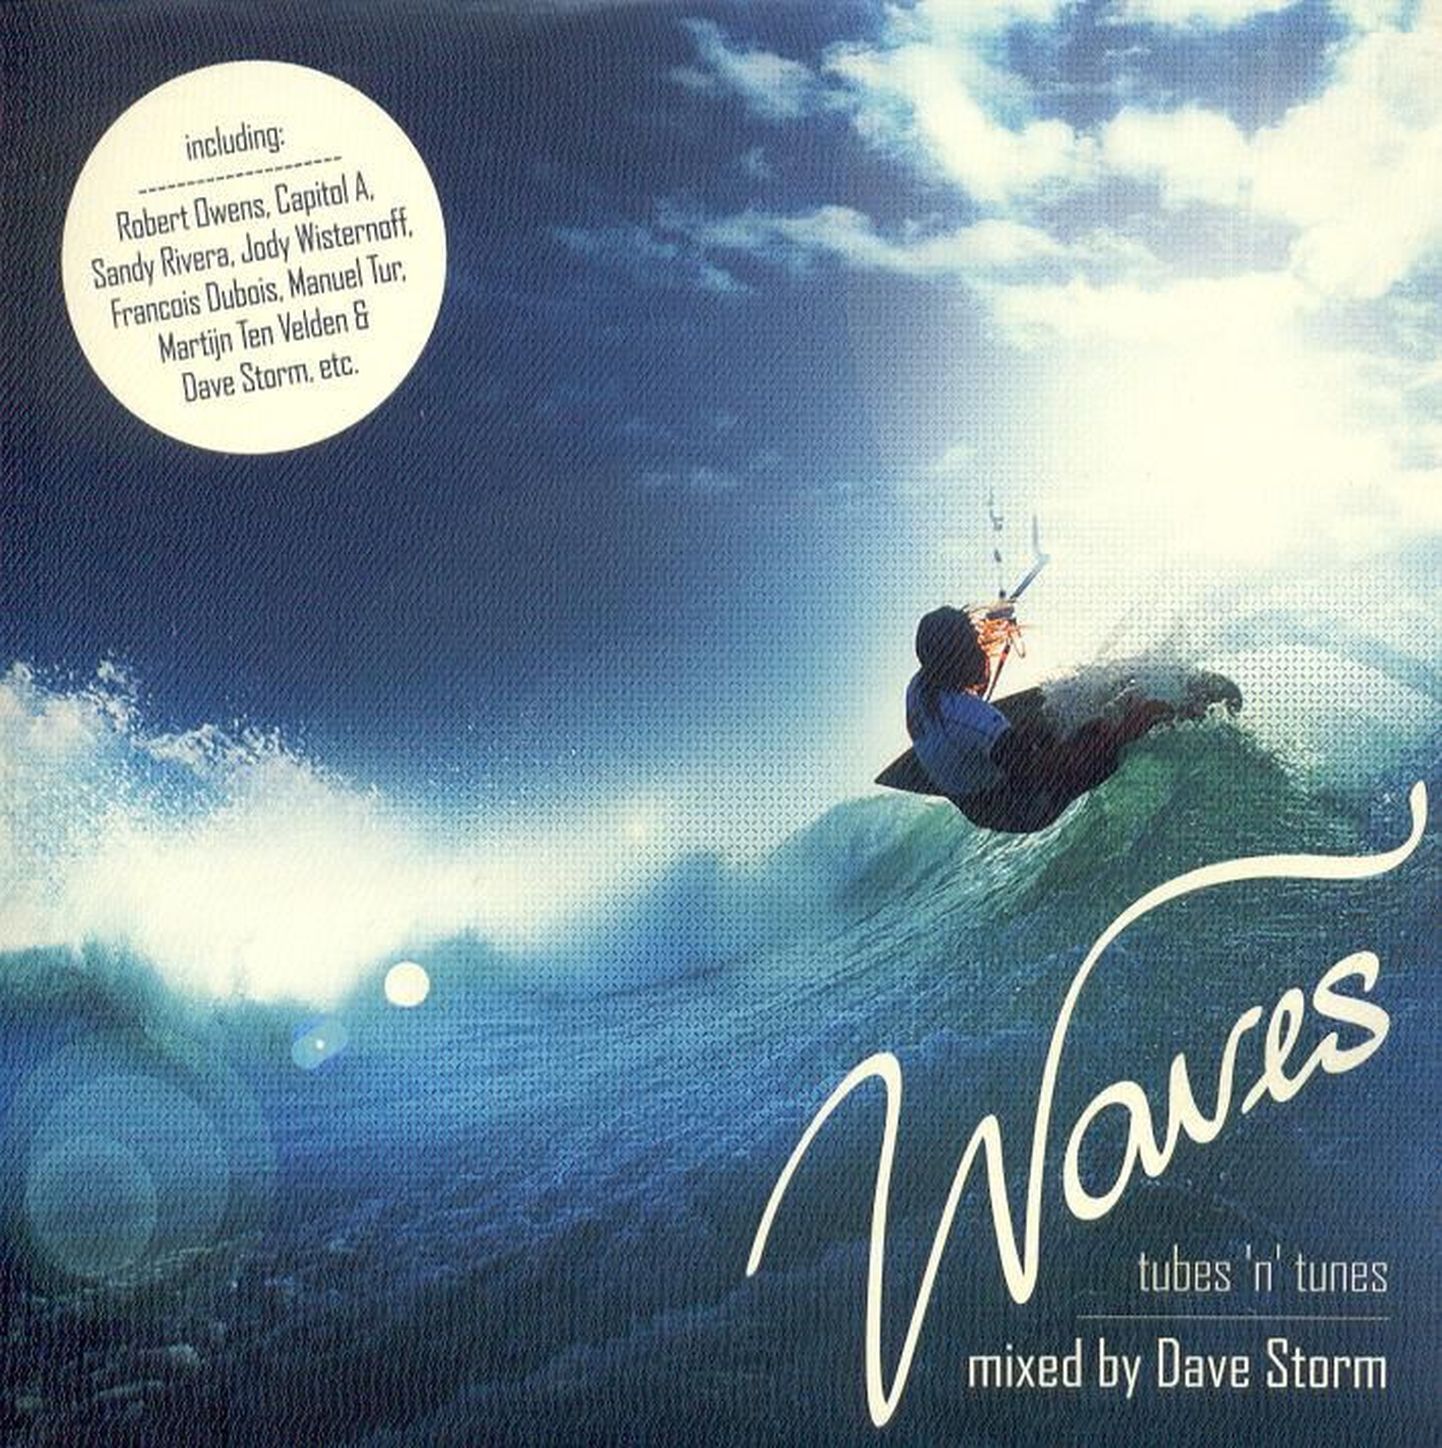 Dave Storm “Waves”.